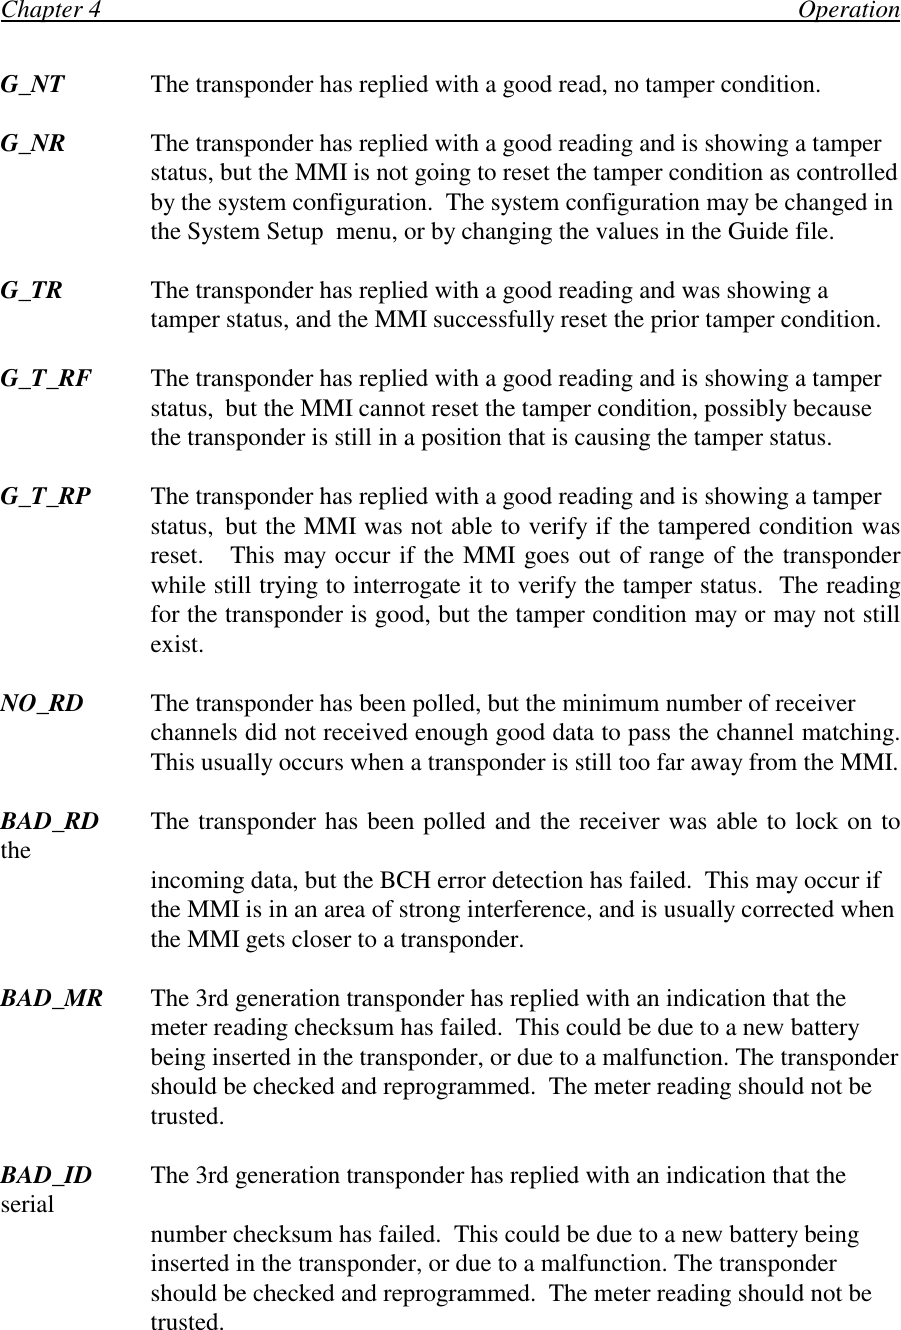 Chapter 4                                                                                                                OperationG_NT The transponder has replied with a good read, no tamper condition.G_NR The transponder has replied with a good reading and is showing a tamperstatus, but the MMI is not going to reset the tamper condition as controlledby the system configuration.  The system configuration may be changed inthe System Setup  menu, or by changing the values in the Guide file.G_TR The transponder has replied with a good reading and was showing atamper status, and the MMI successfully reset the prior tamper condition.G_T_RF The transponder has replied with a good reading and is showing a tamper status, but the MMI cannot reset the tamper condition, possibly becausethe transponder is still in a position that is causing the tamper status.G_T_RP The transponder has replied with a good reading and is showing a tamperstatus, but the MMI was not able to verify if the tampered condition wasreset.   This may occur if the MMI goes out of range of the transponderwhile still trying to interrogate it to verify the tamper status.  The readingfor the transponder is good, but the tamper condition may or may not stillexist.NO_RD The transponder has been polled, but the minimum number of receiverchannels did not received enough good data to pass the channel matching.This usually occurs when a transponder is still too far away from the MMI.BAD_RD The transponder has been polled and the receiver was able to lock on tothe incoming data, but the BCH error detection has failed.  This may occur ifthe MMI is in an area of strong interference, and is usually corrected whenthe MMI gets closer to a transponder.BAD_MR The 3rd generation transponder has replied with an indication that themeter reading checksum has failed.  This could be due to a new batterybeing inserted in the transponder, or due to a malfunction. The transpondershould be checked and reprogrammed.  The meter reading should not betrusted.BAD_ID The 3rd generation transponder has replied with an indication that theserial number checksum has failed.  This could be due to a new battery beinginserted in the transponder, or due to a malfunction. The transpondershould be checked and reprogrammed.  The meter reading should not betrusted.